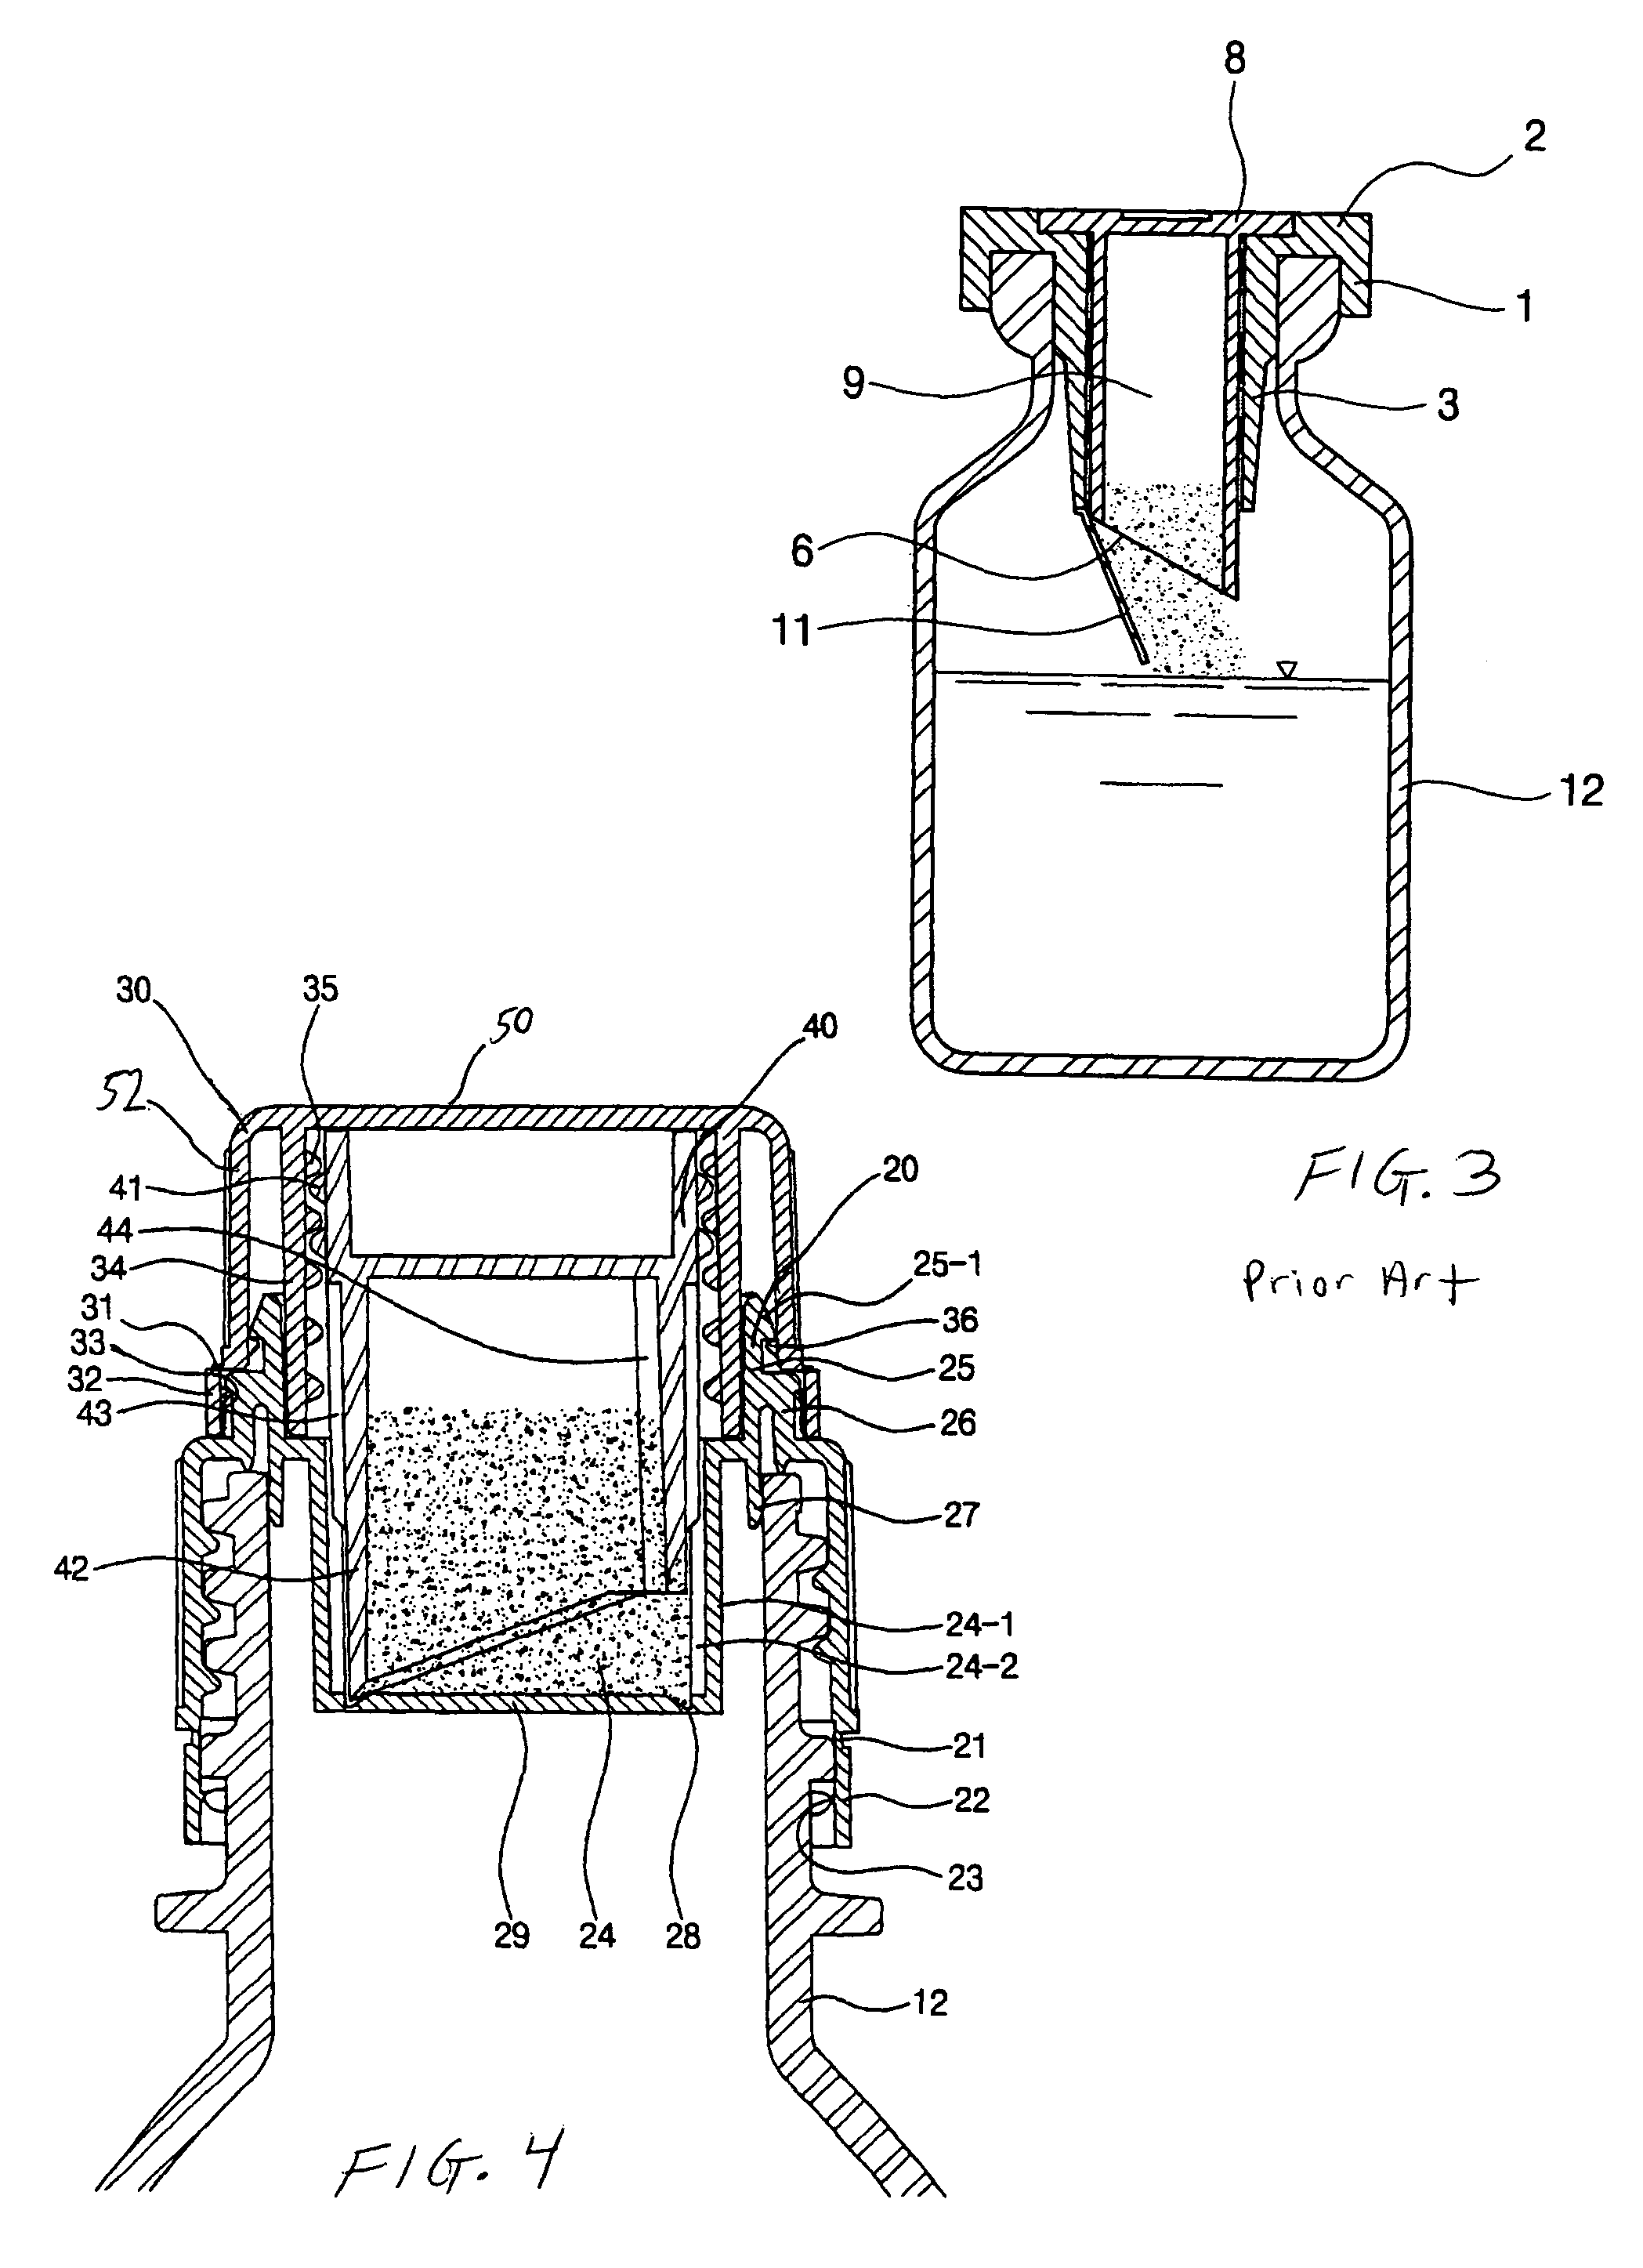 Sanitary double cap allowing addition of adjunct to contents of a container